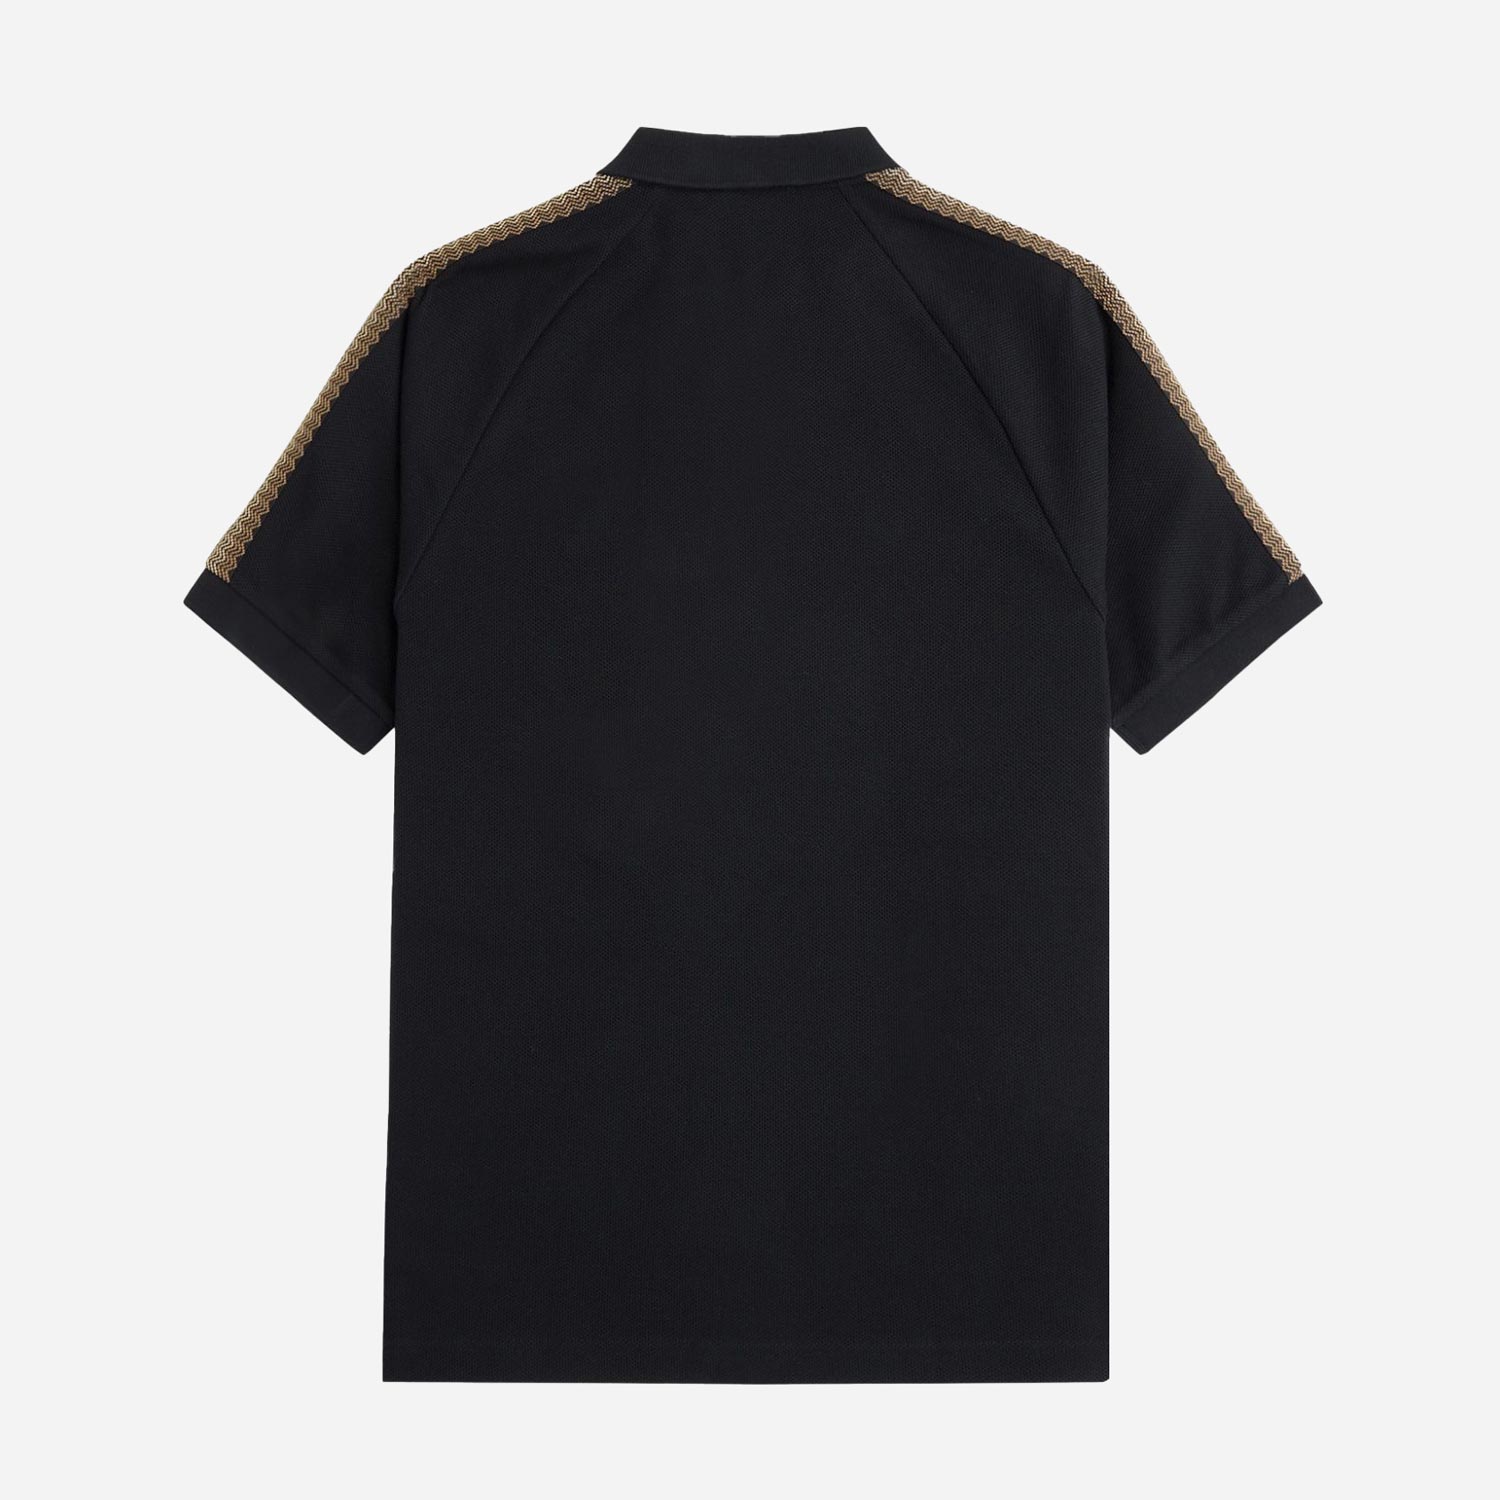 Fred Perry Honeycomb Taped Regular Fit Short Sleeve Polo - Black